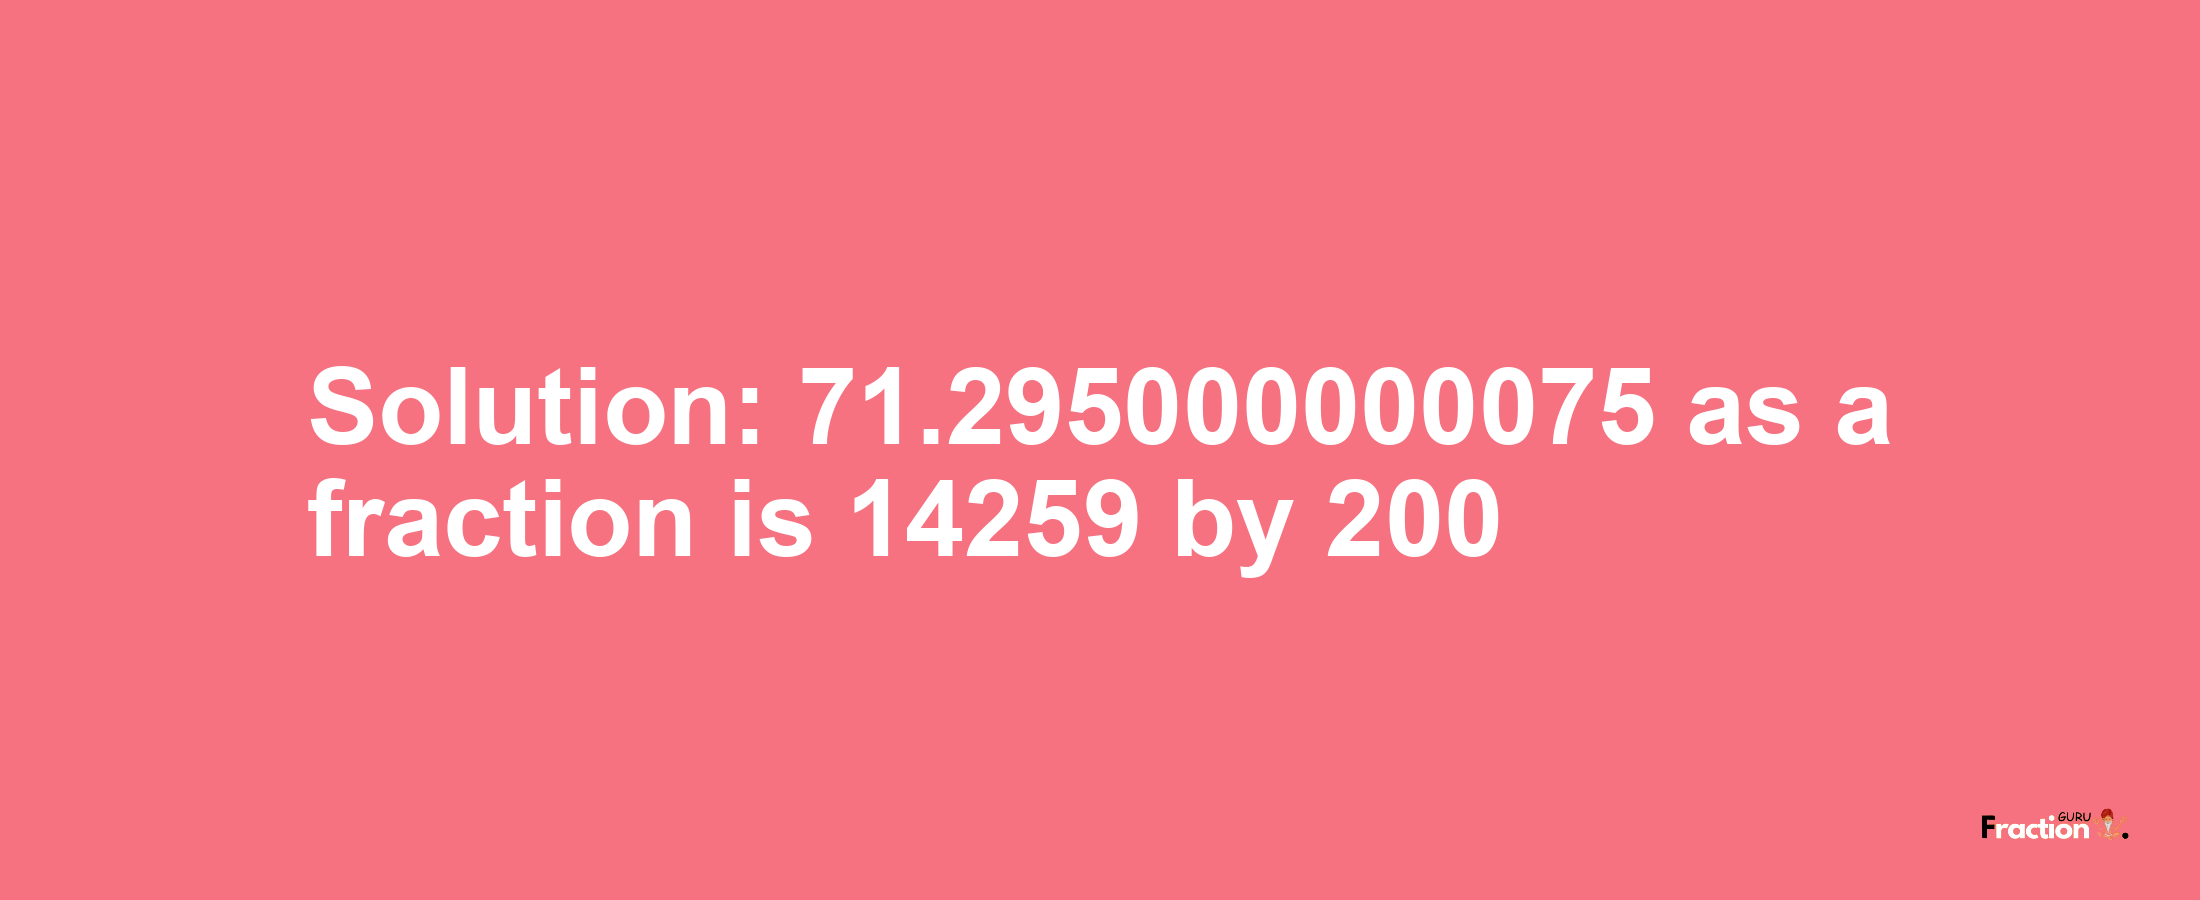 Solution:71.295000000075 as a fraction is 14259/200